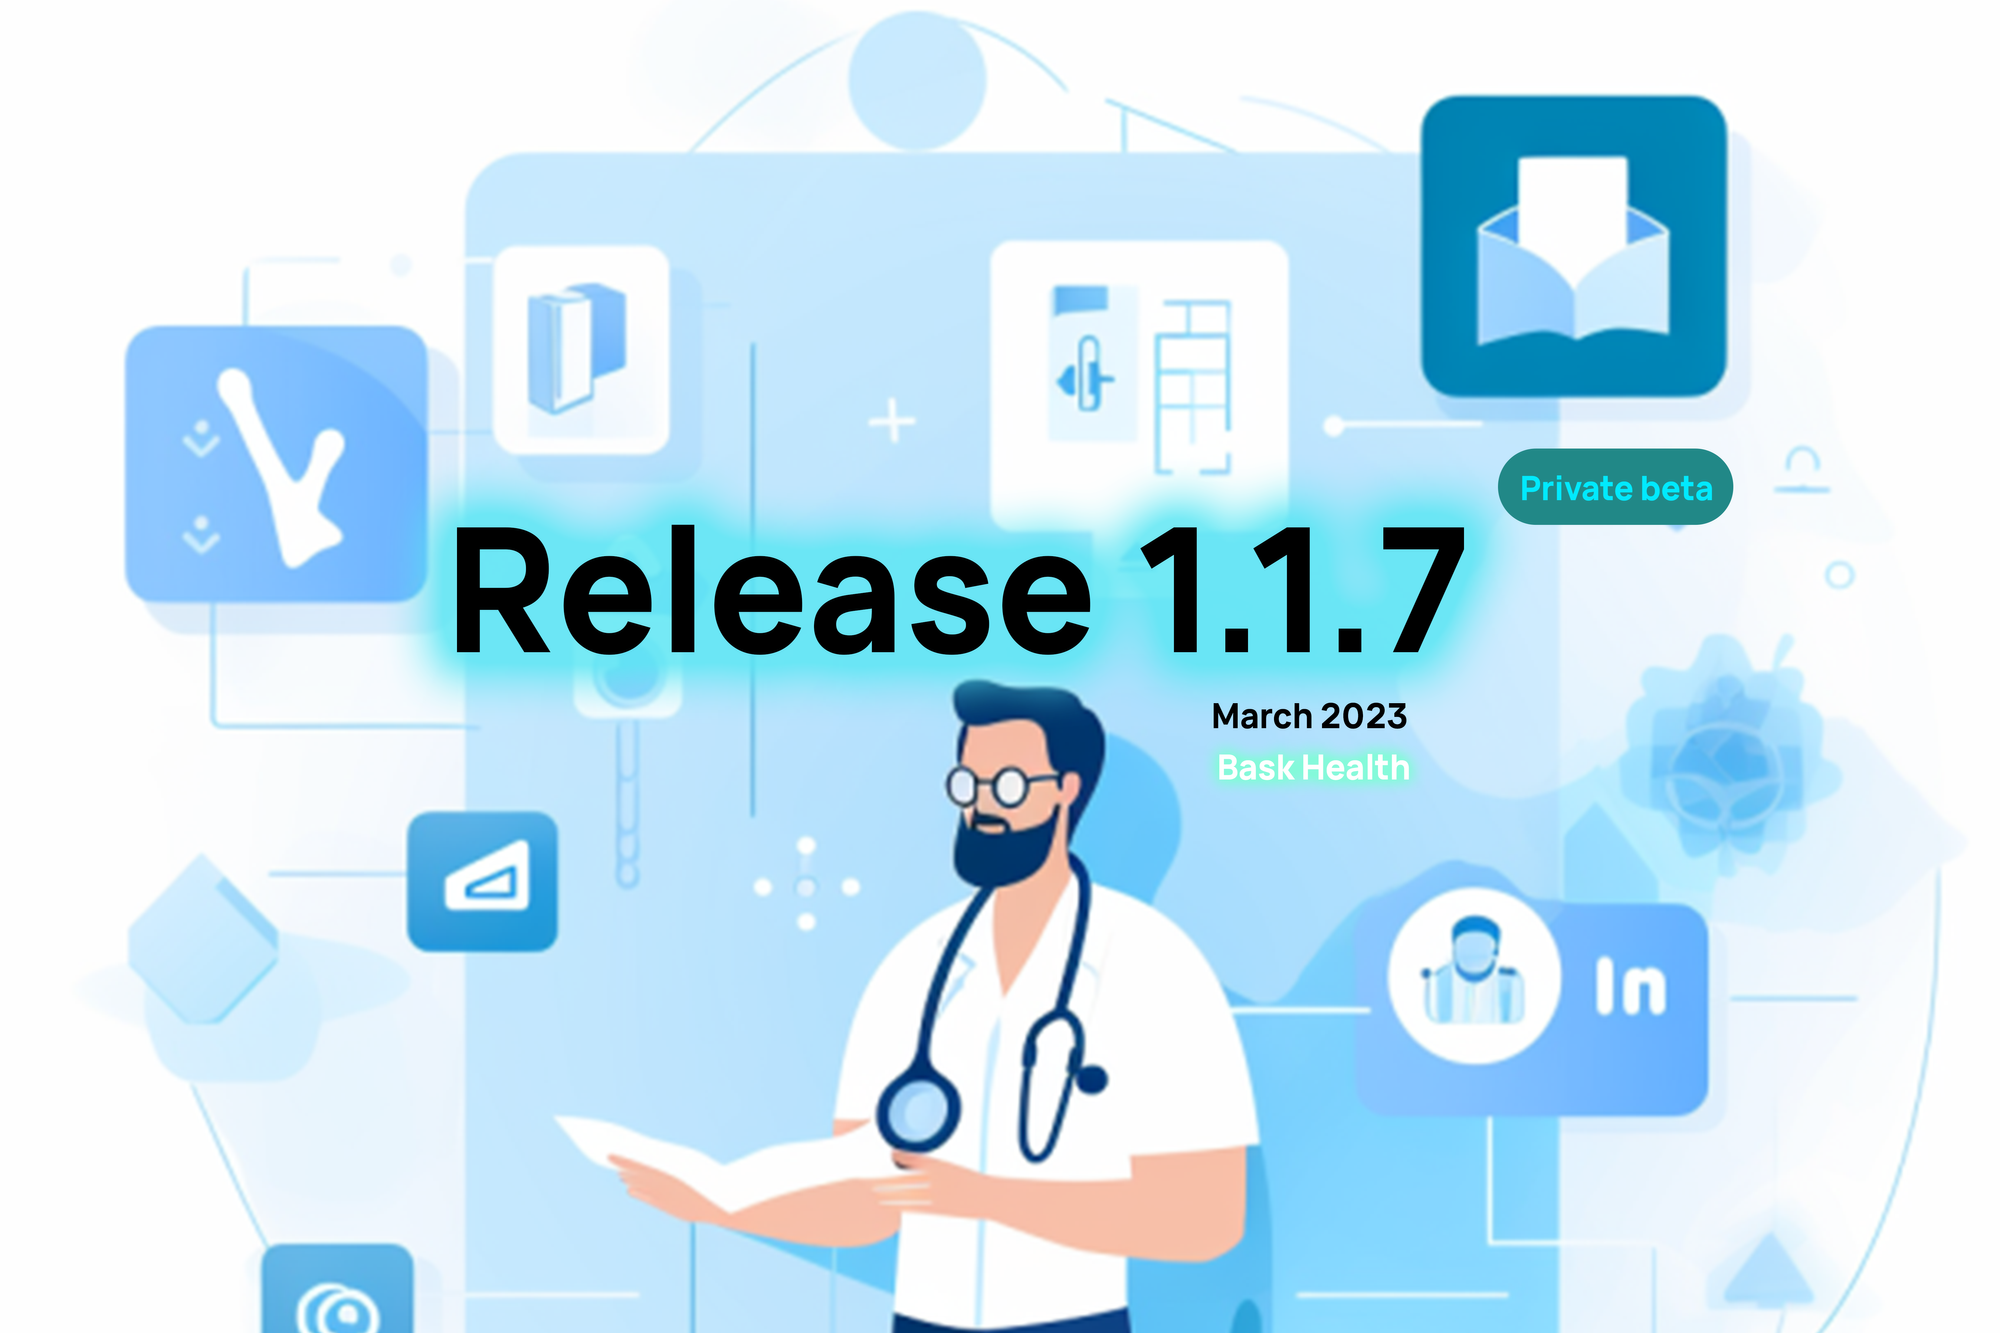 Release 1.1.7